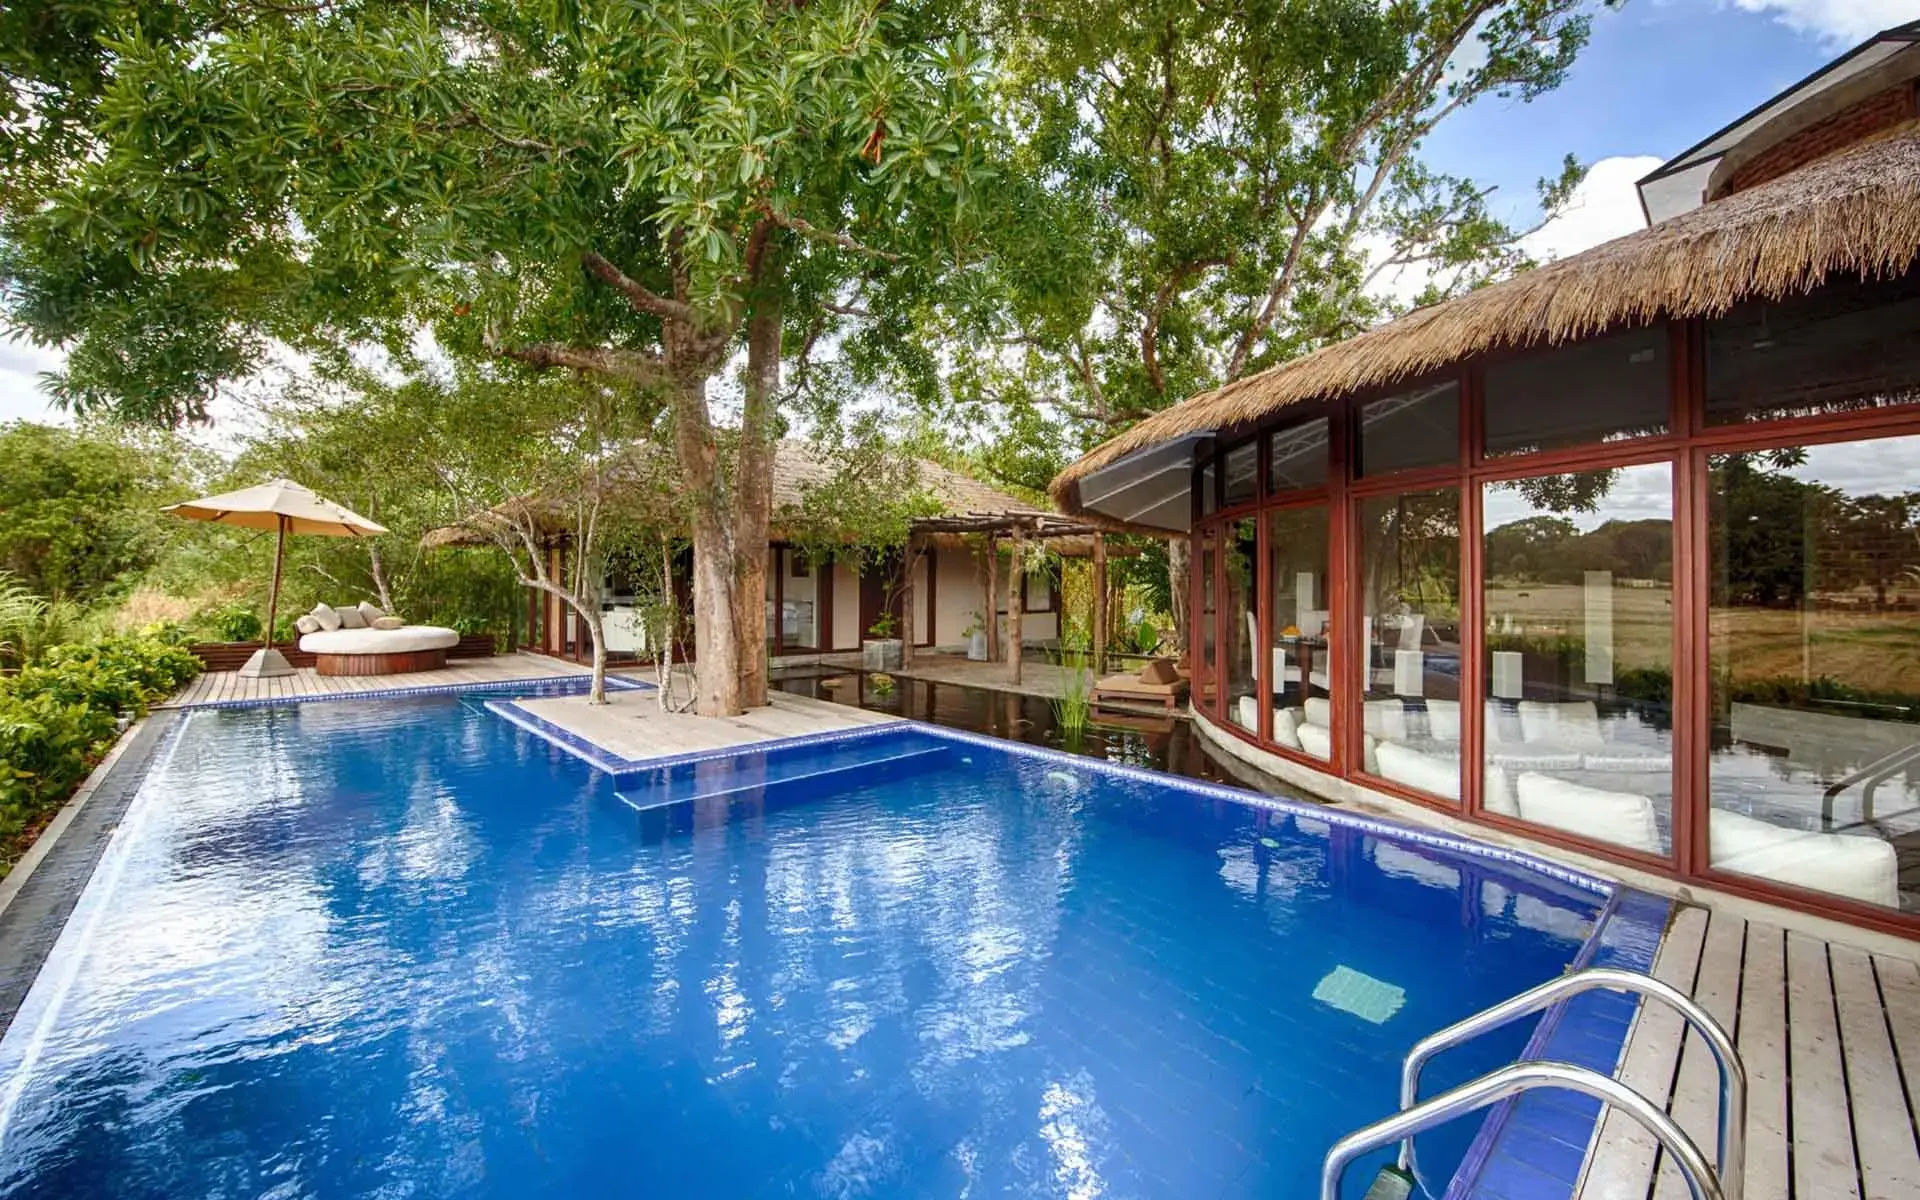 one of the private pools in the Nikawala Villas. It is spacious and shaded by a large tree.